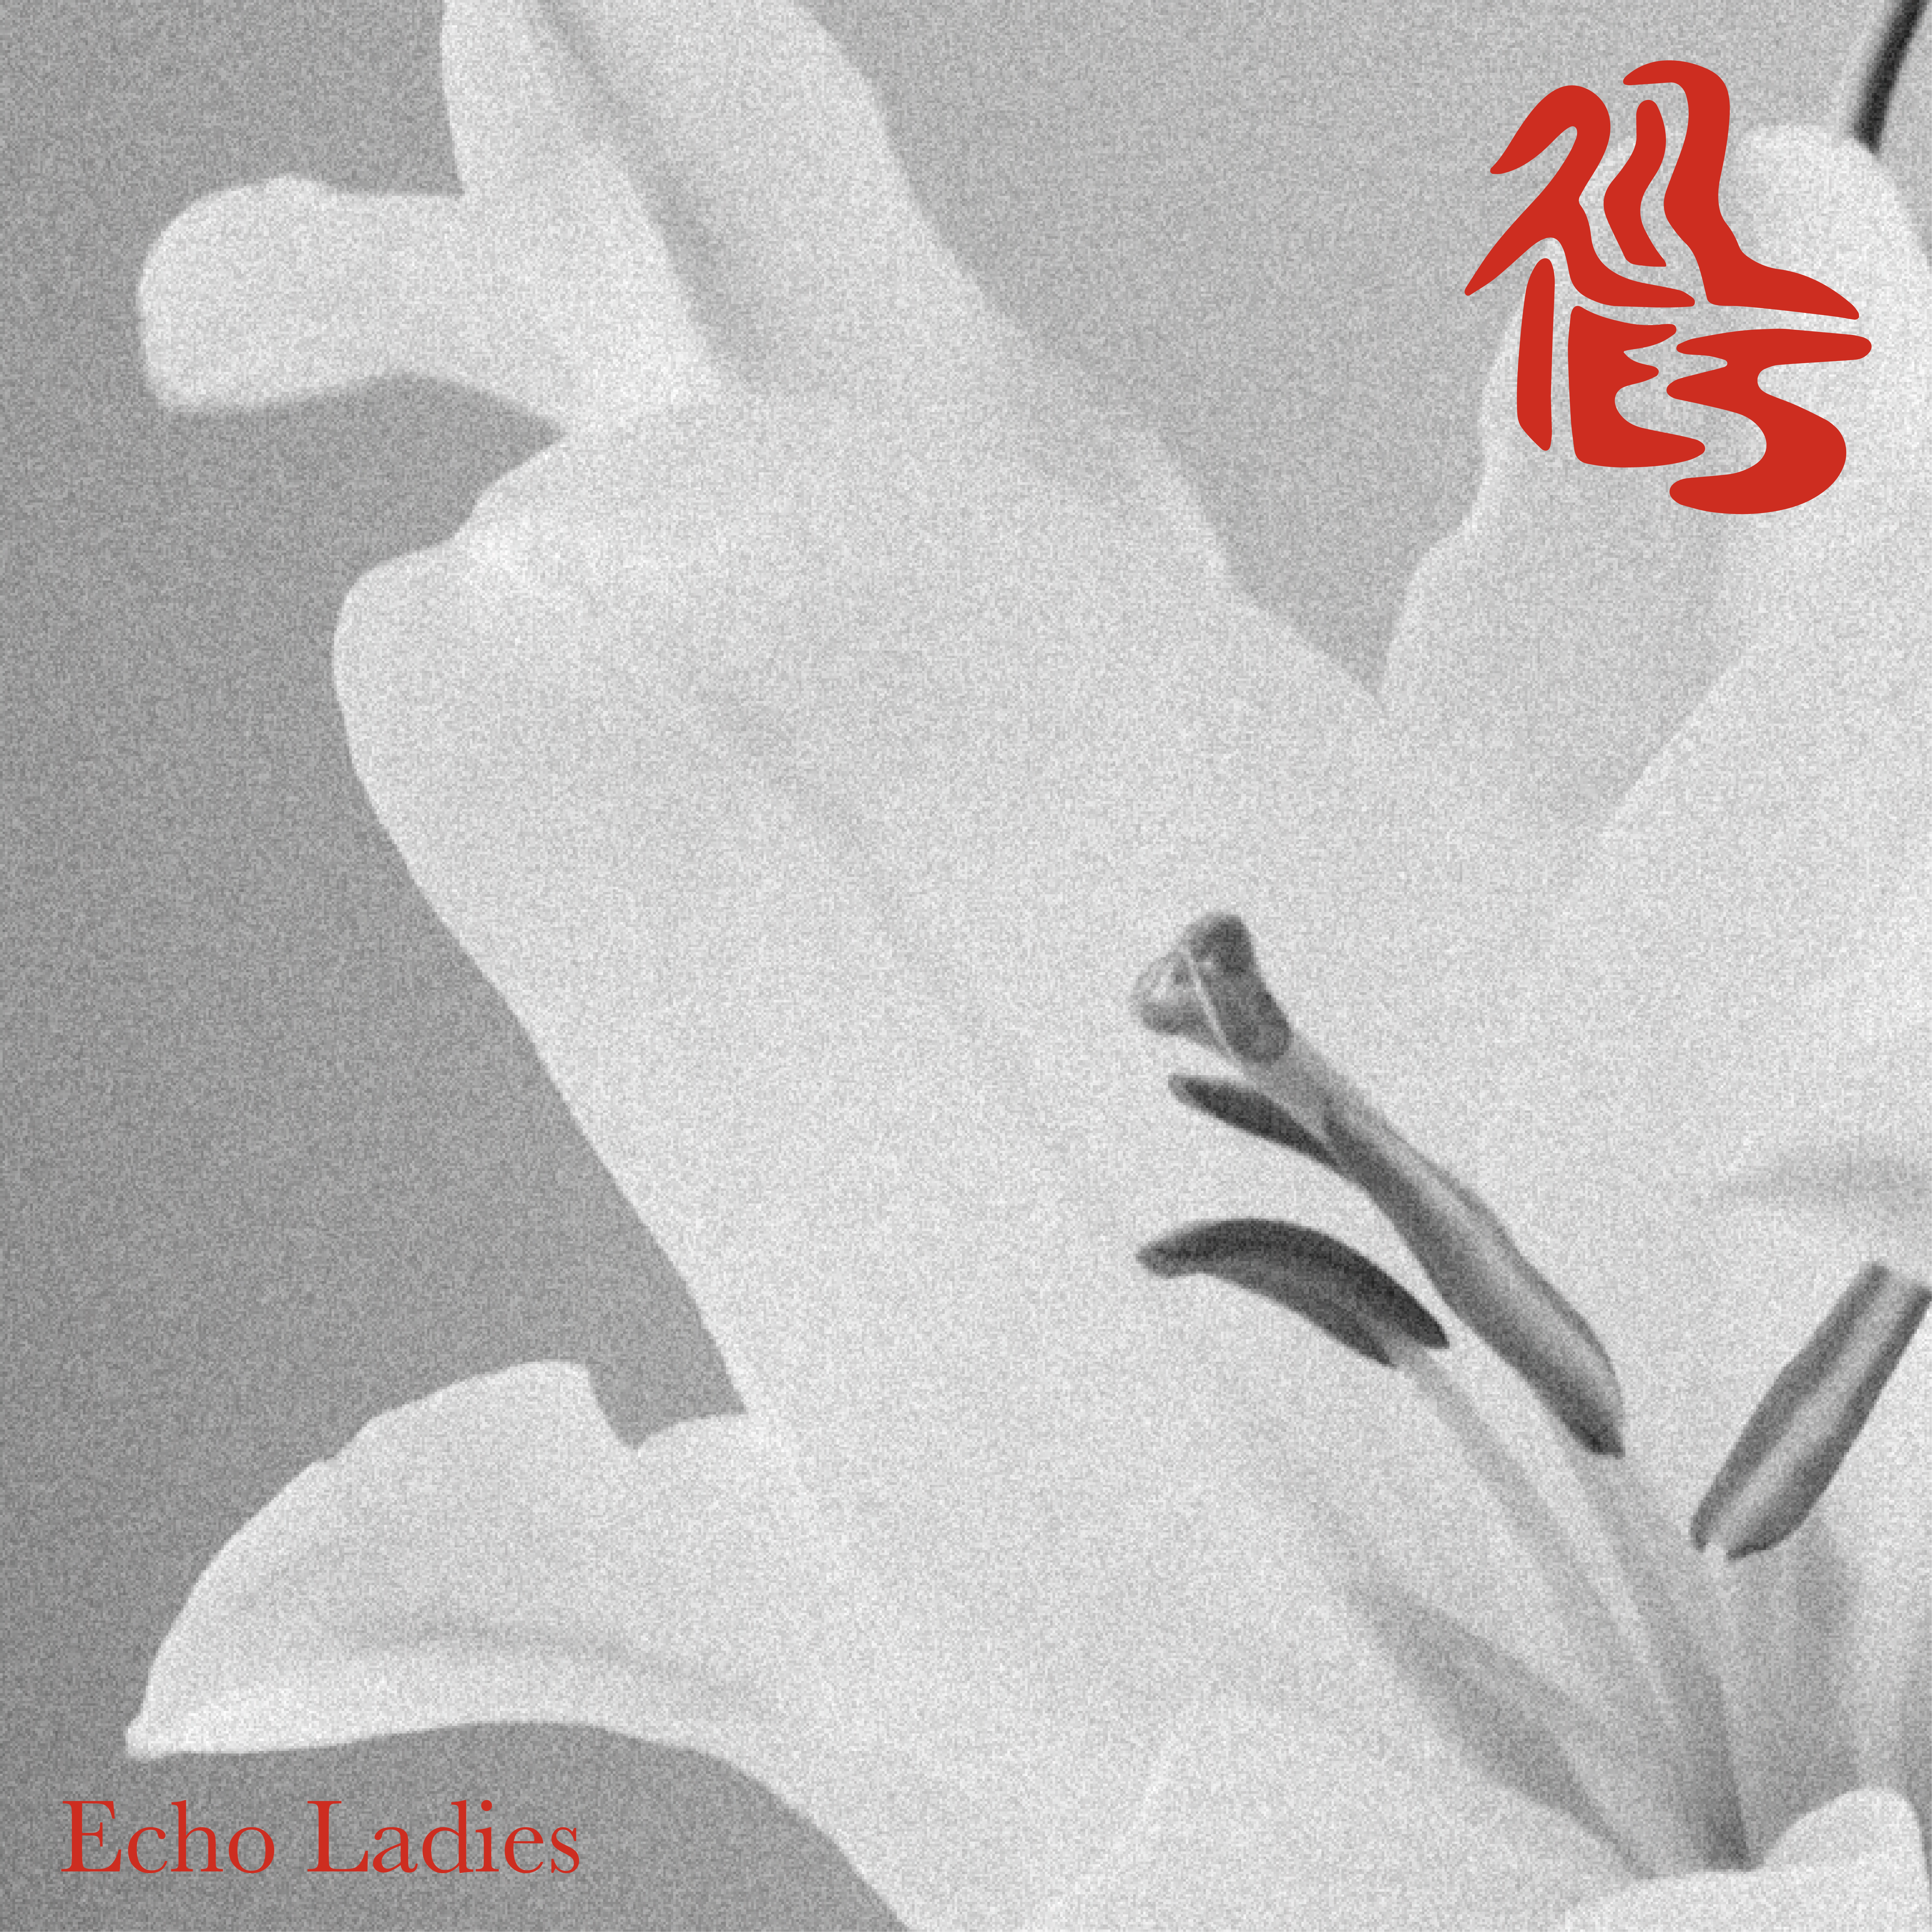 ALBUM REVIEW: Lilies by Echo Ladies